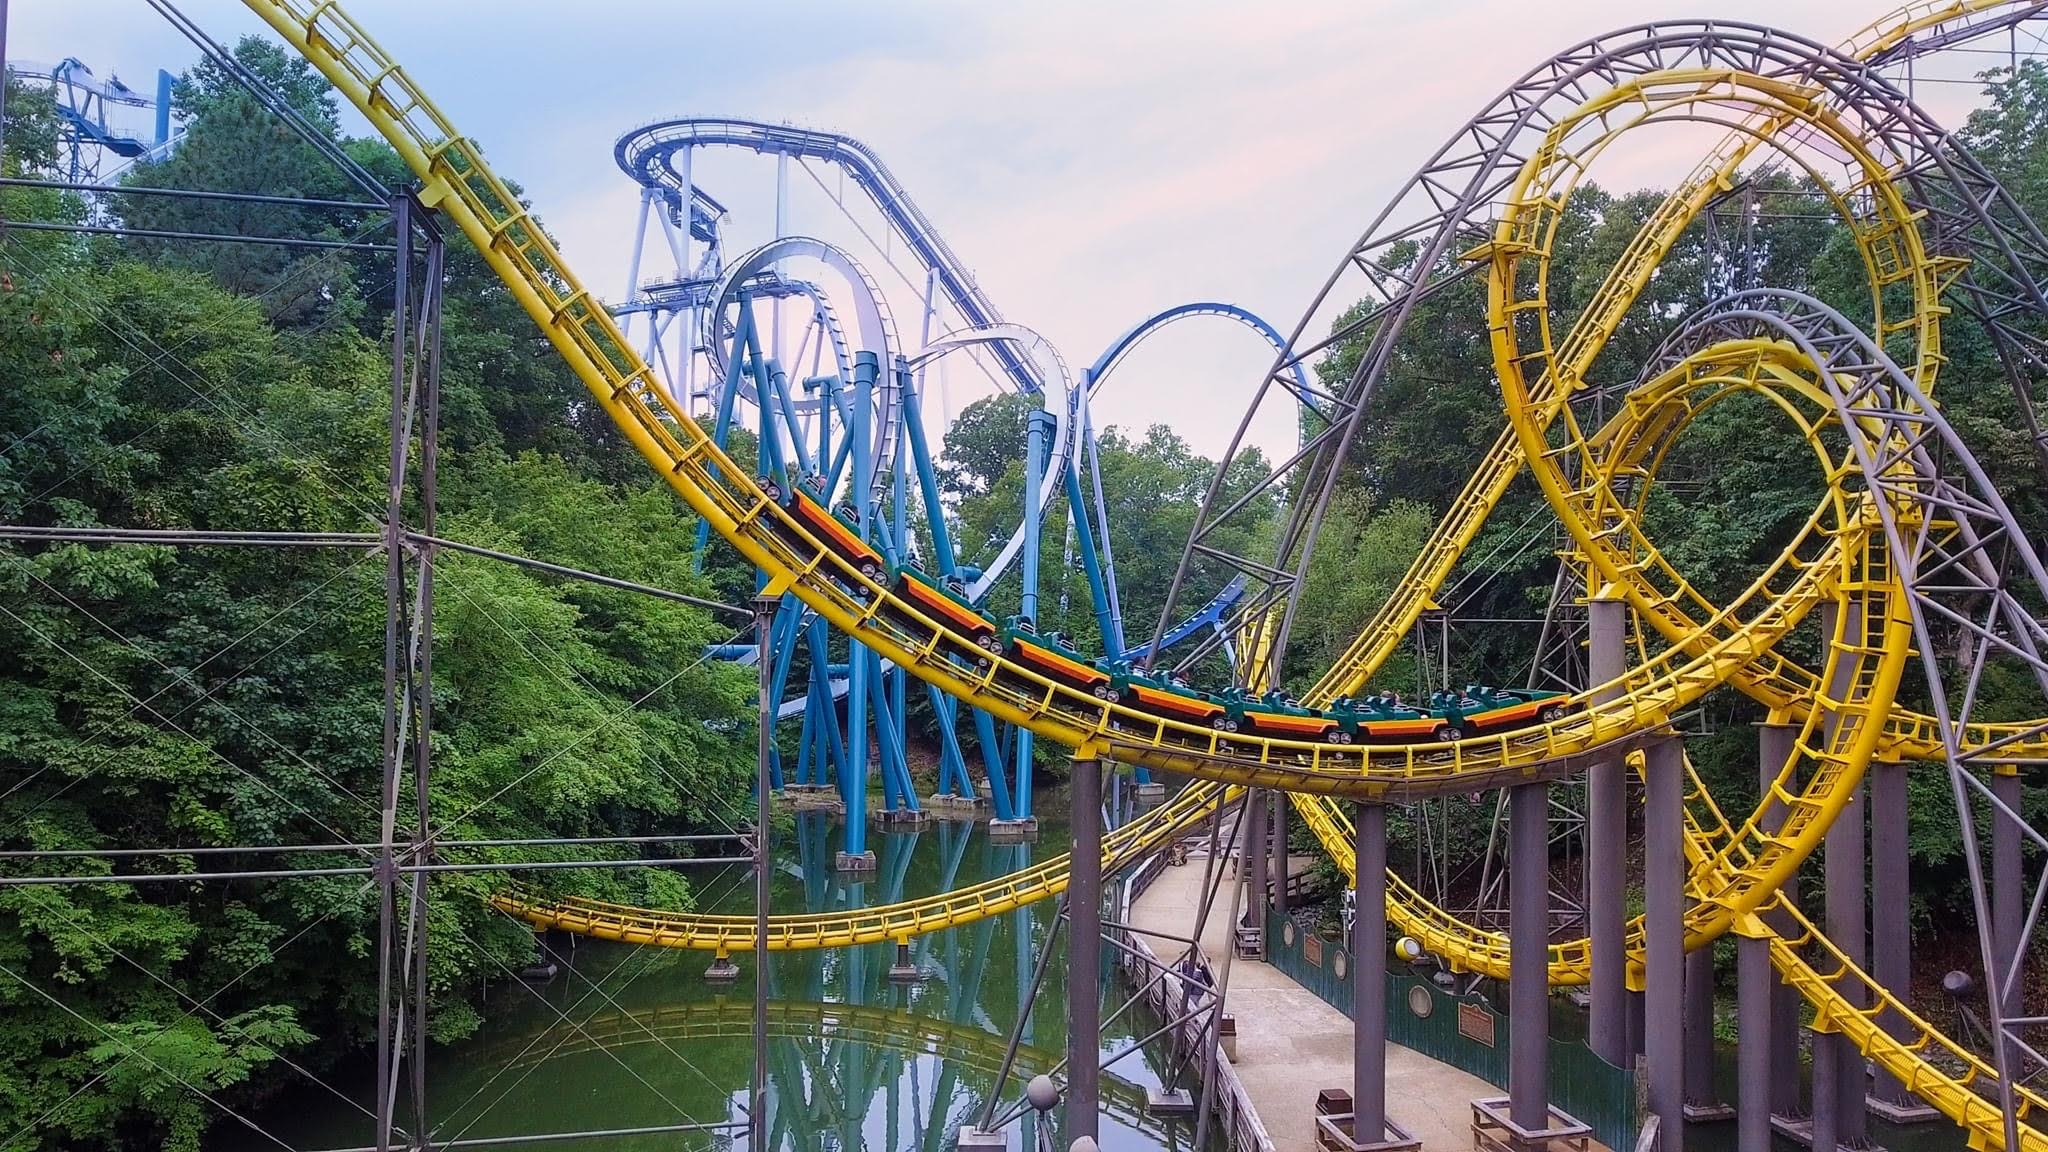 Busch Gardens roller coasters all all over the park